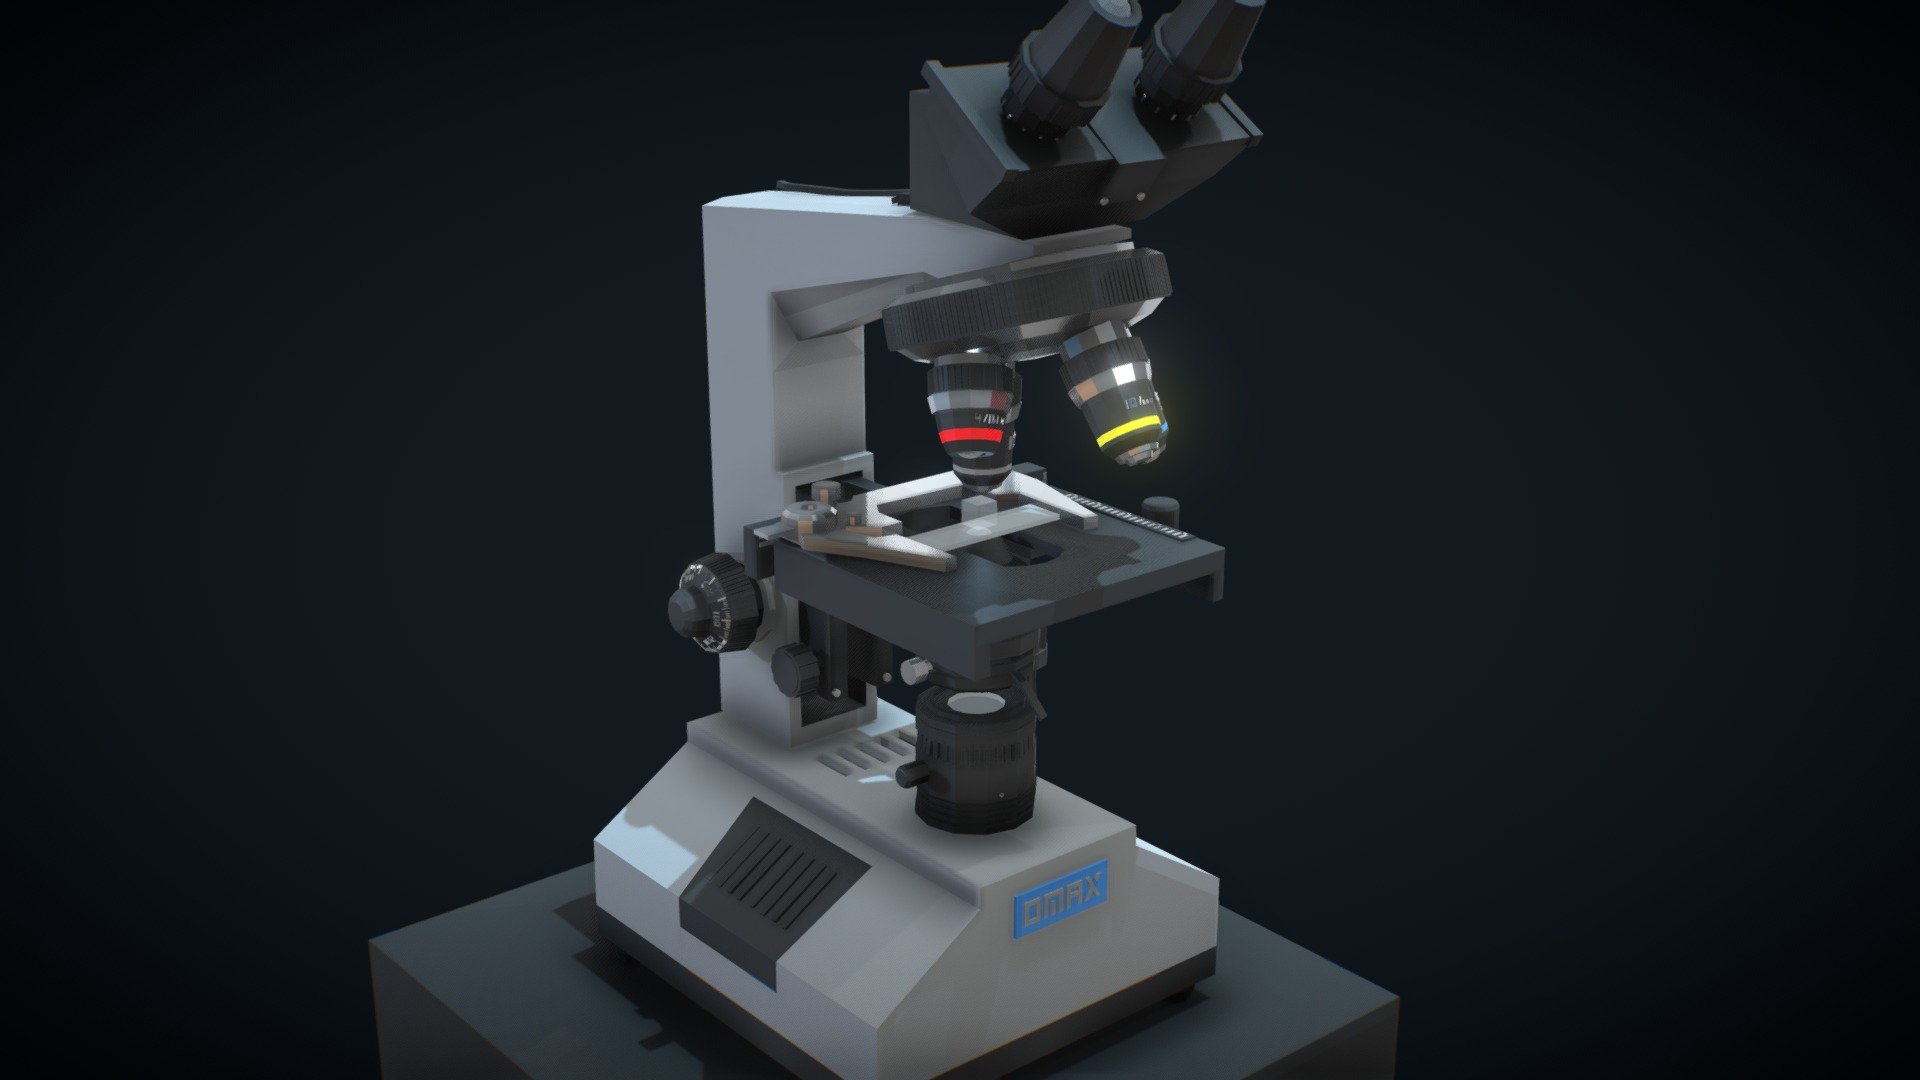 An Omax Binocular Compound Microscope. I thought it would be a great challenge to model, plus one day I would love to own one, specially a digital one. Hope you like it. Build with Blocks by Google in VR.

3donimus.com - Omax Binocular Compound Microscope MadeWthBlocks - 3D model by 3Donimus 3d model